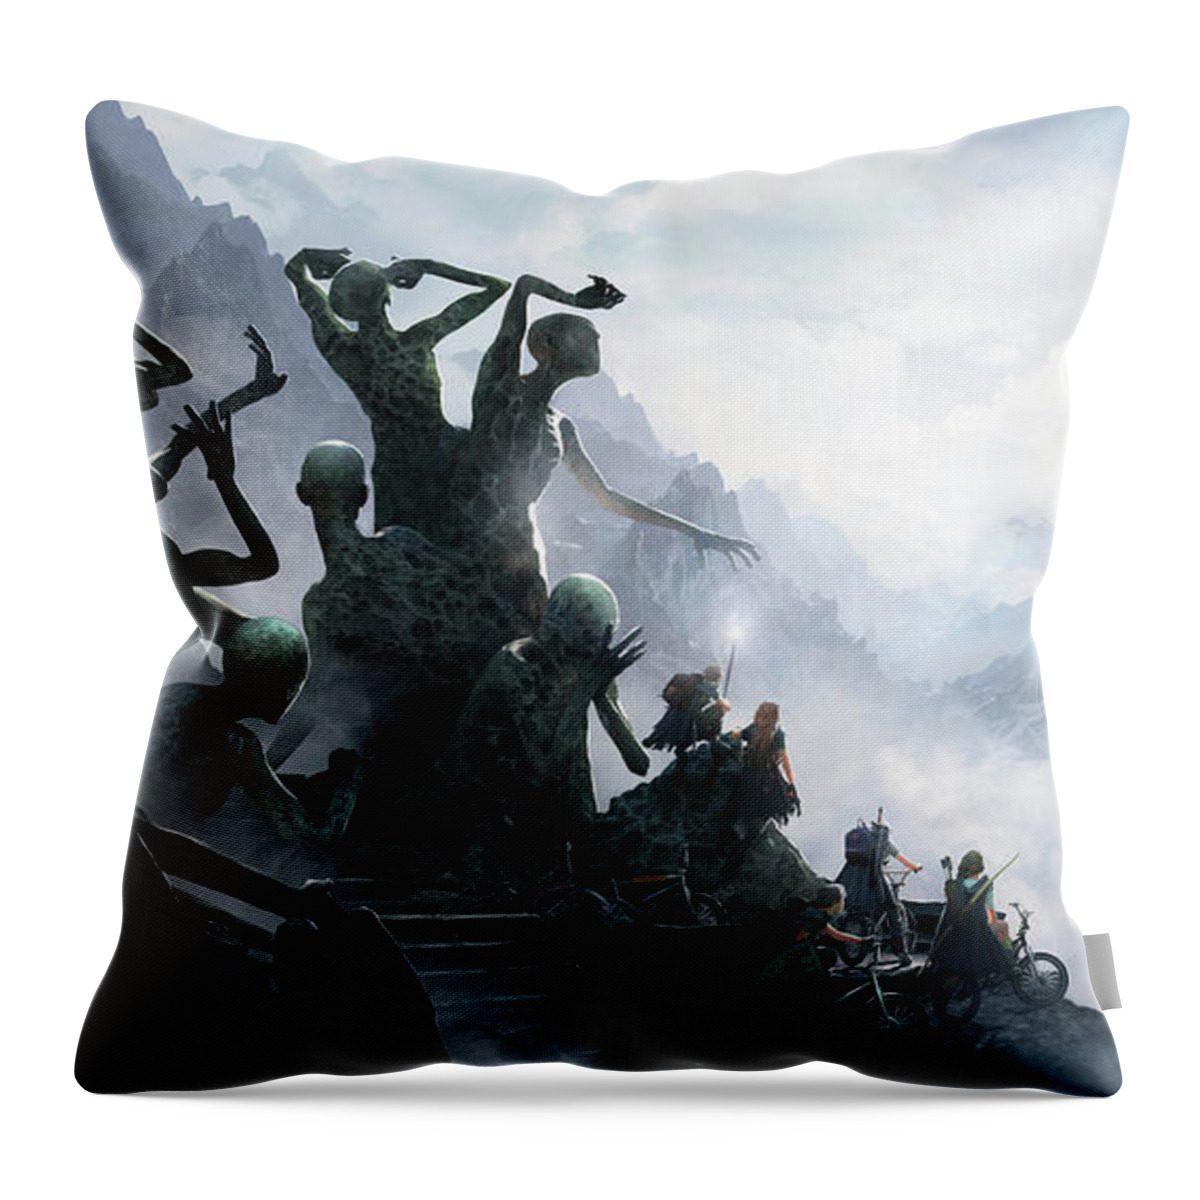 Landscape Throw Pillow featuring the painting The Journey by Guillem H Pongiluppi